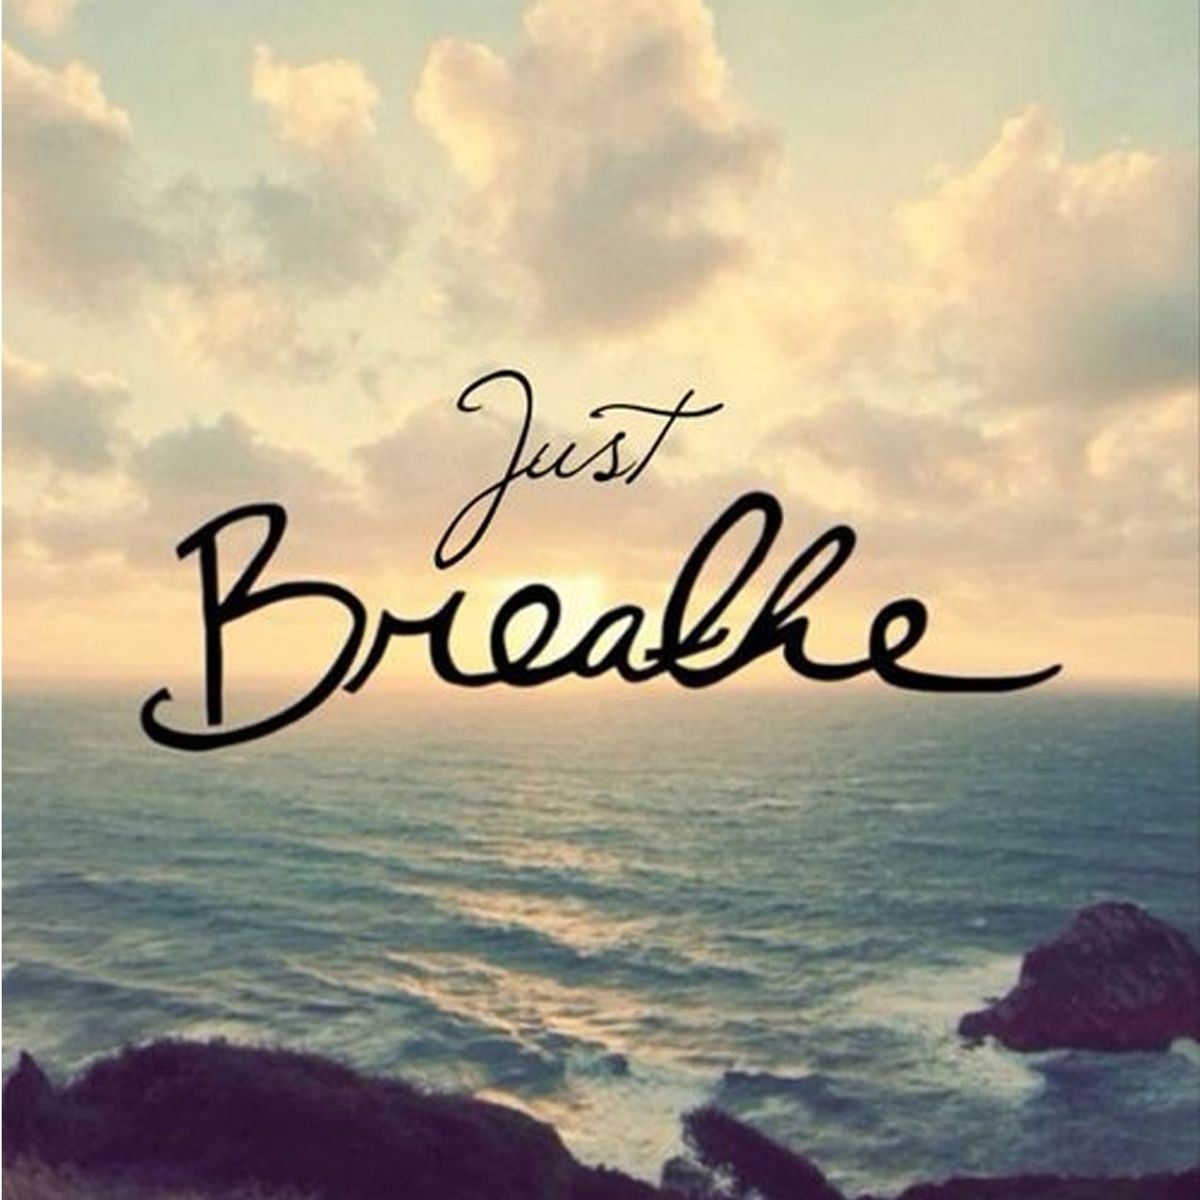 Breathe: An Open Letter to My Present Self